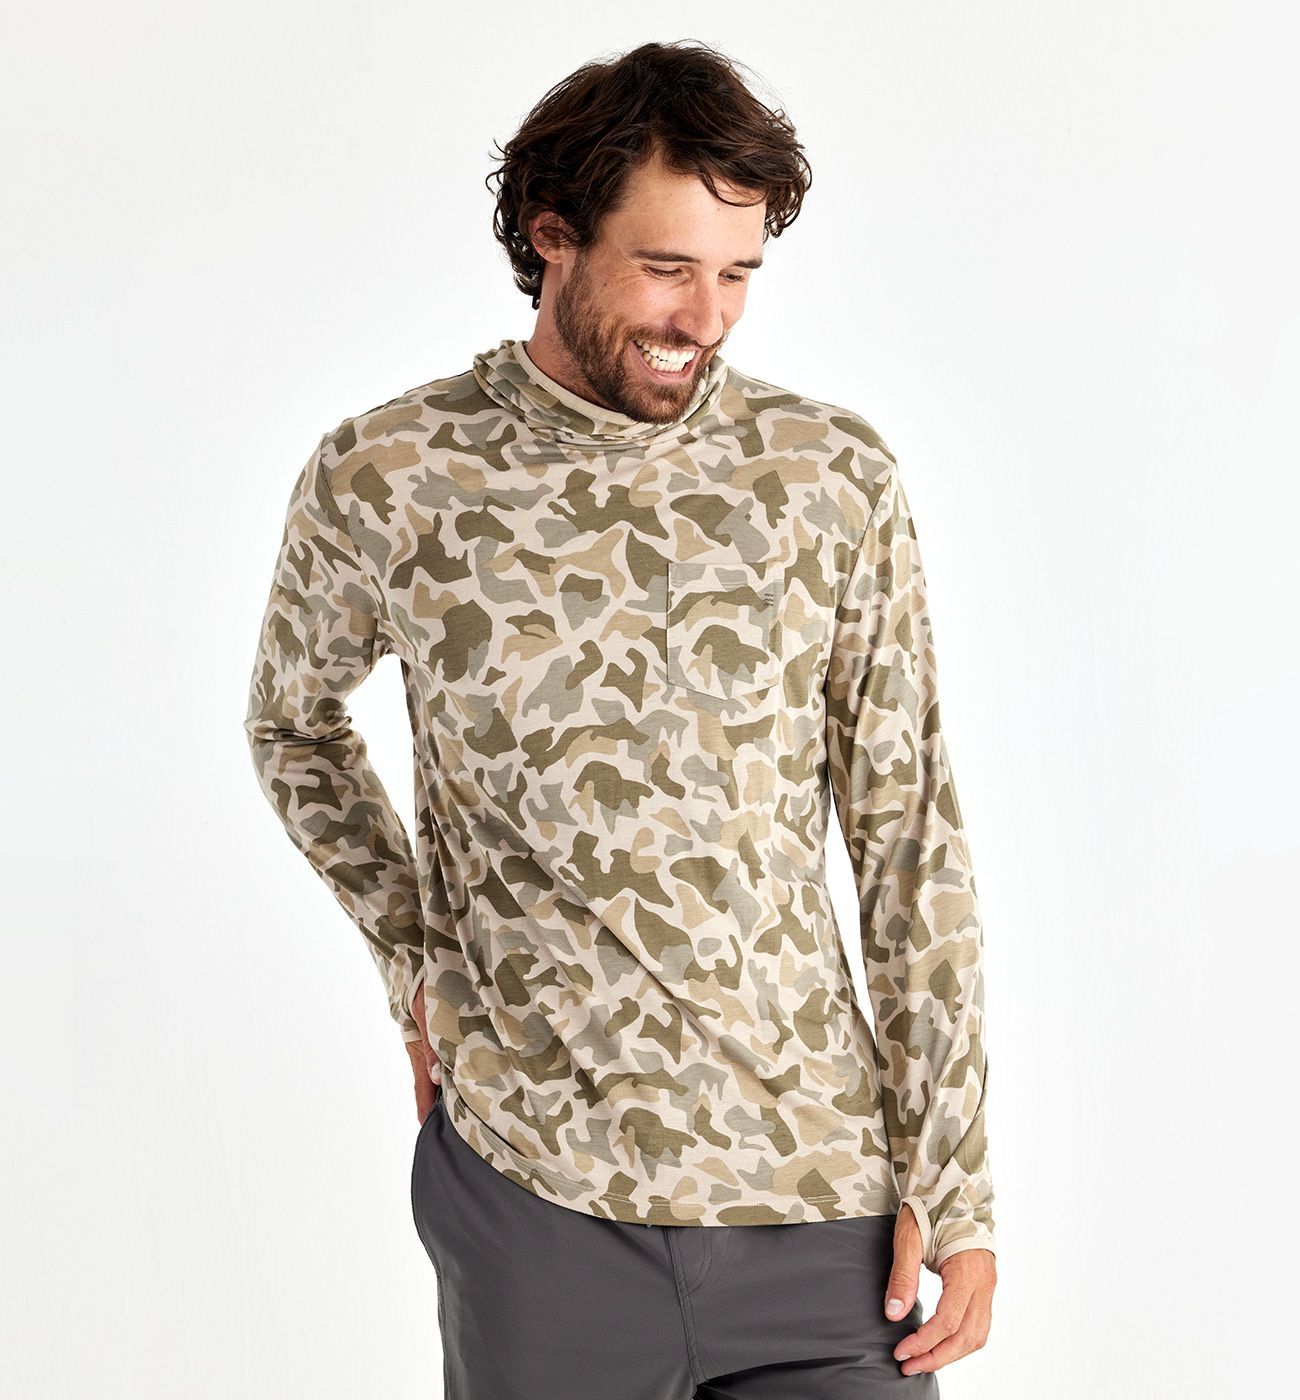 MENS BAMBOO SHADE HOODIE - BARRIER ISLAND CAMO, Size: MEN'S LARGE